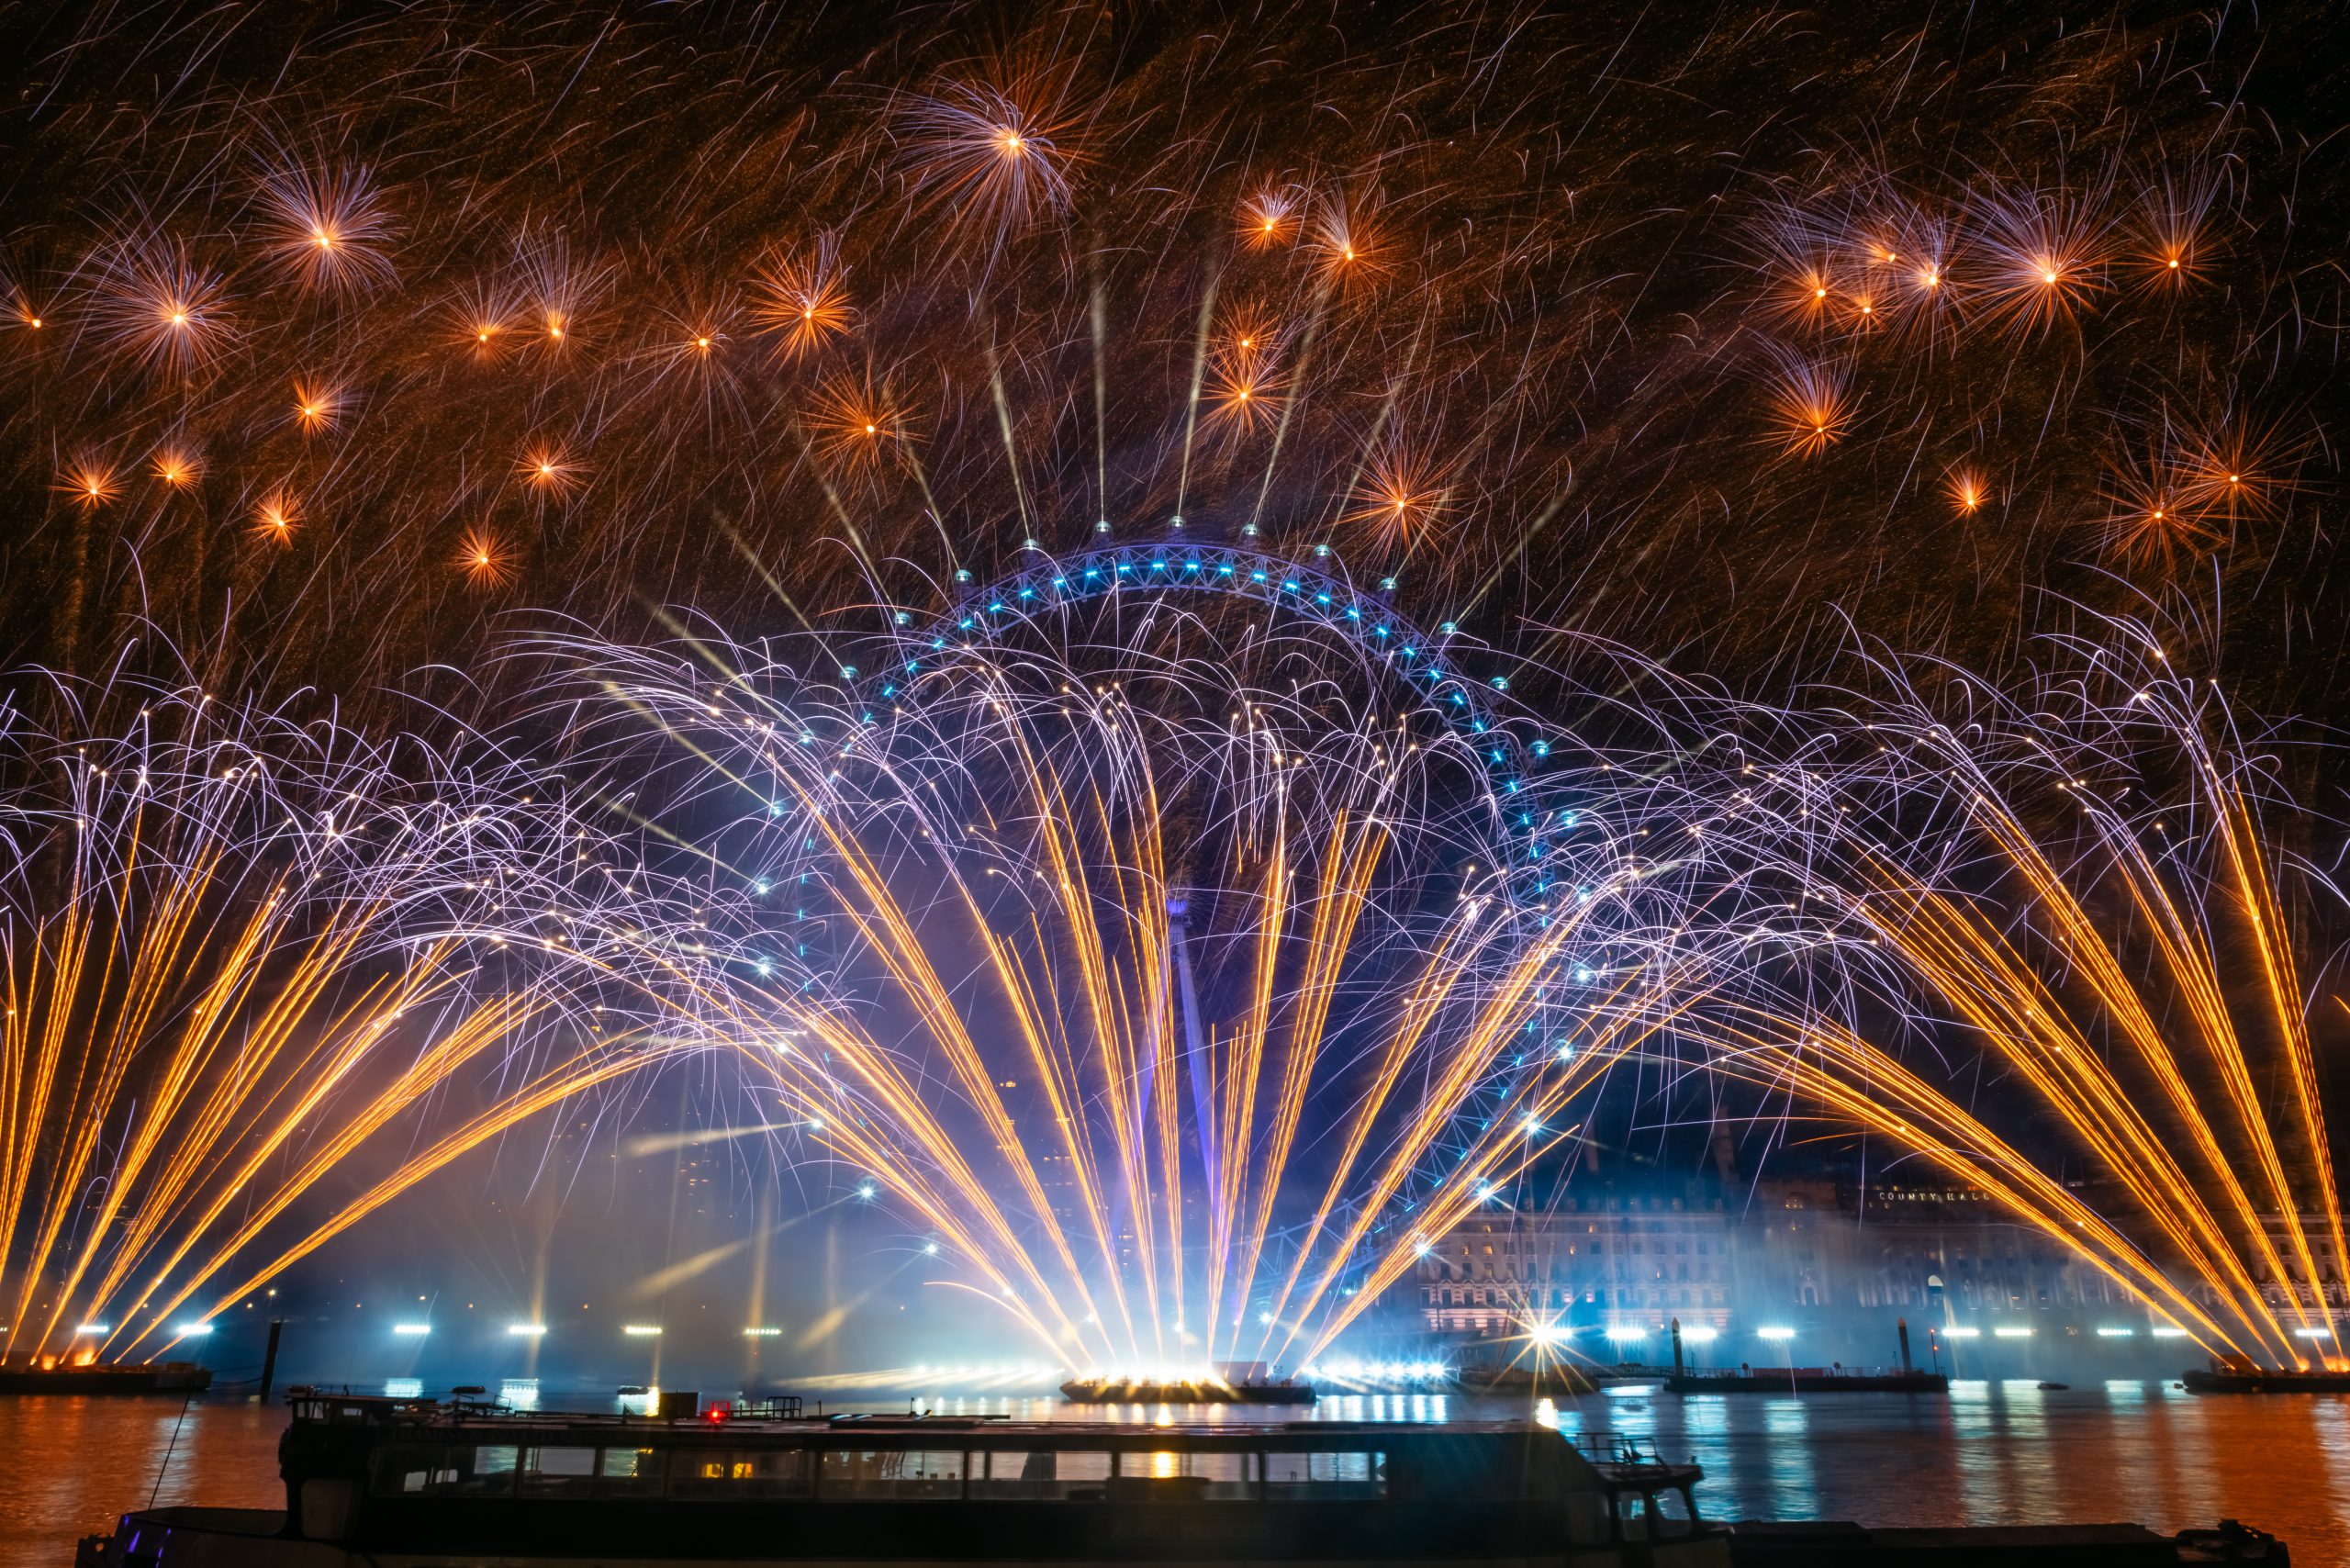 Fireworks and the London Eye